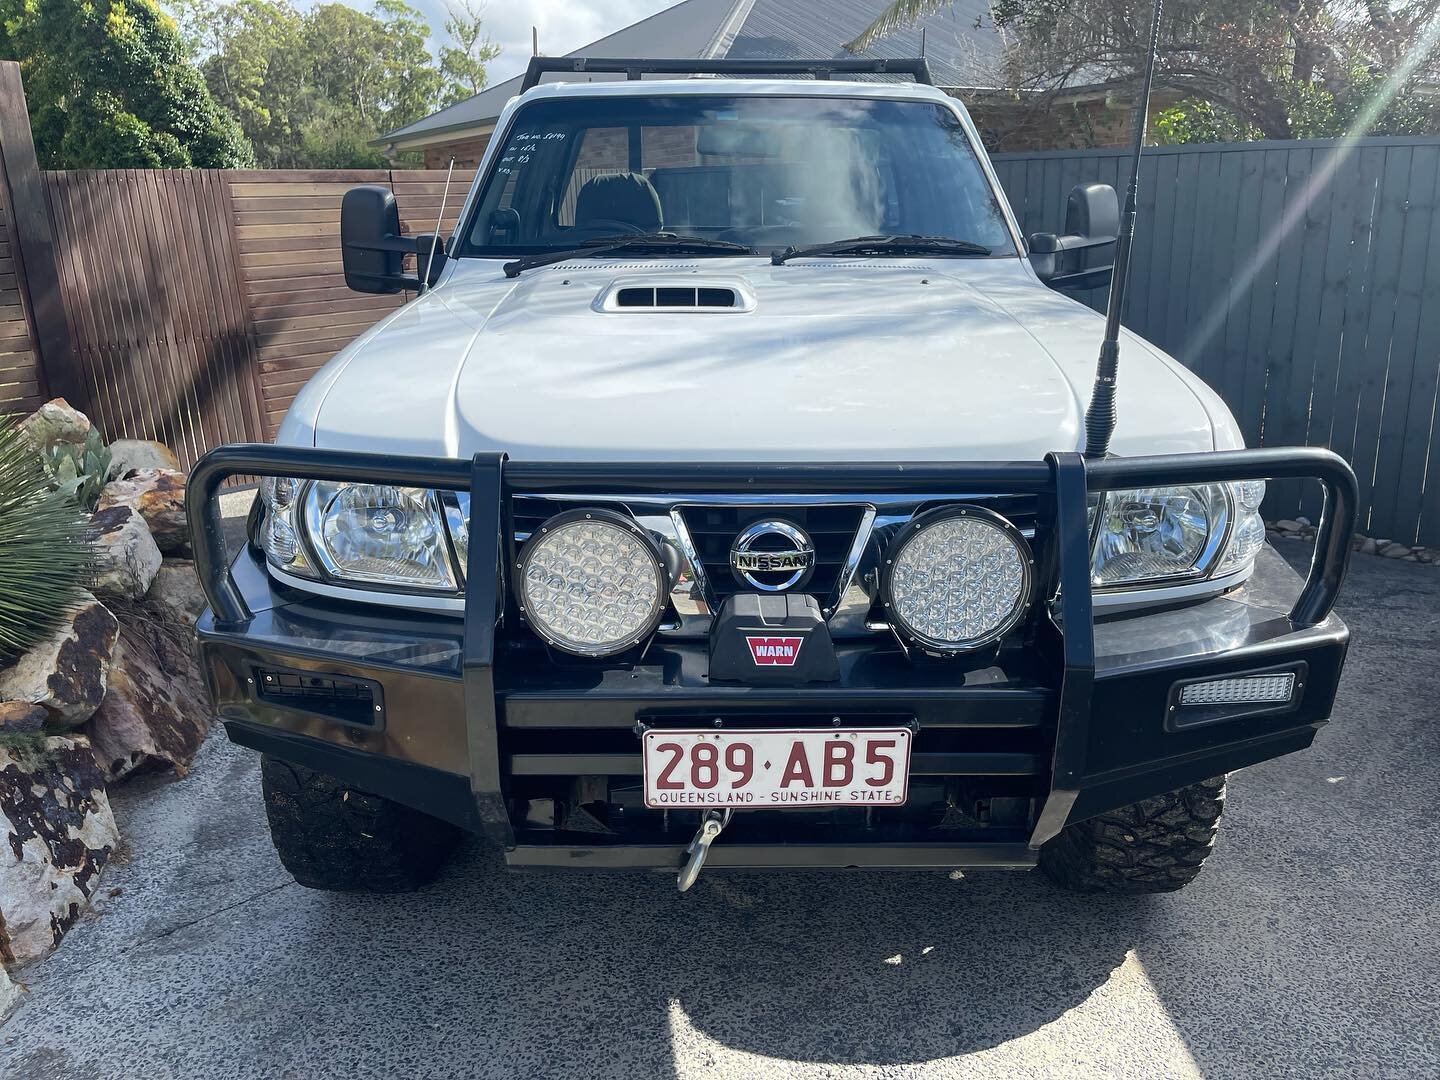 Nissan Patrol Hail Repair..⚒. Been unlucky enough to to be caught in recent SEQ storms? Give us a call for a free quote&hellip; PDRTECH Automotive. 📱0407118815 #pdrtechautomotive #haildamagerepair #stormdamage #dents #seq #northbrisbane #pushinmetal